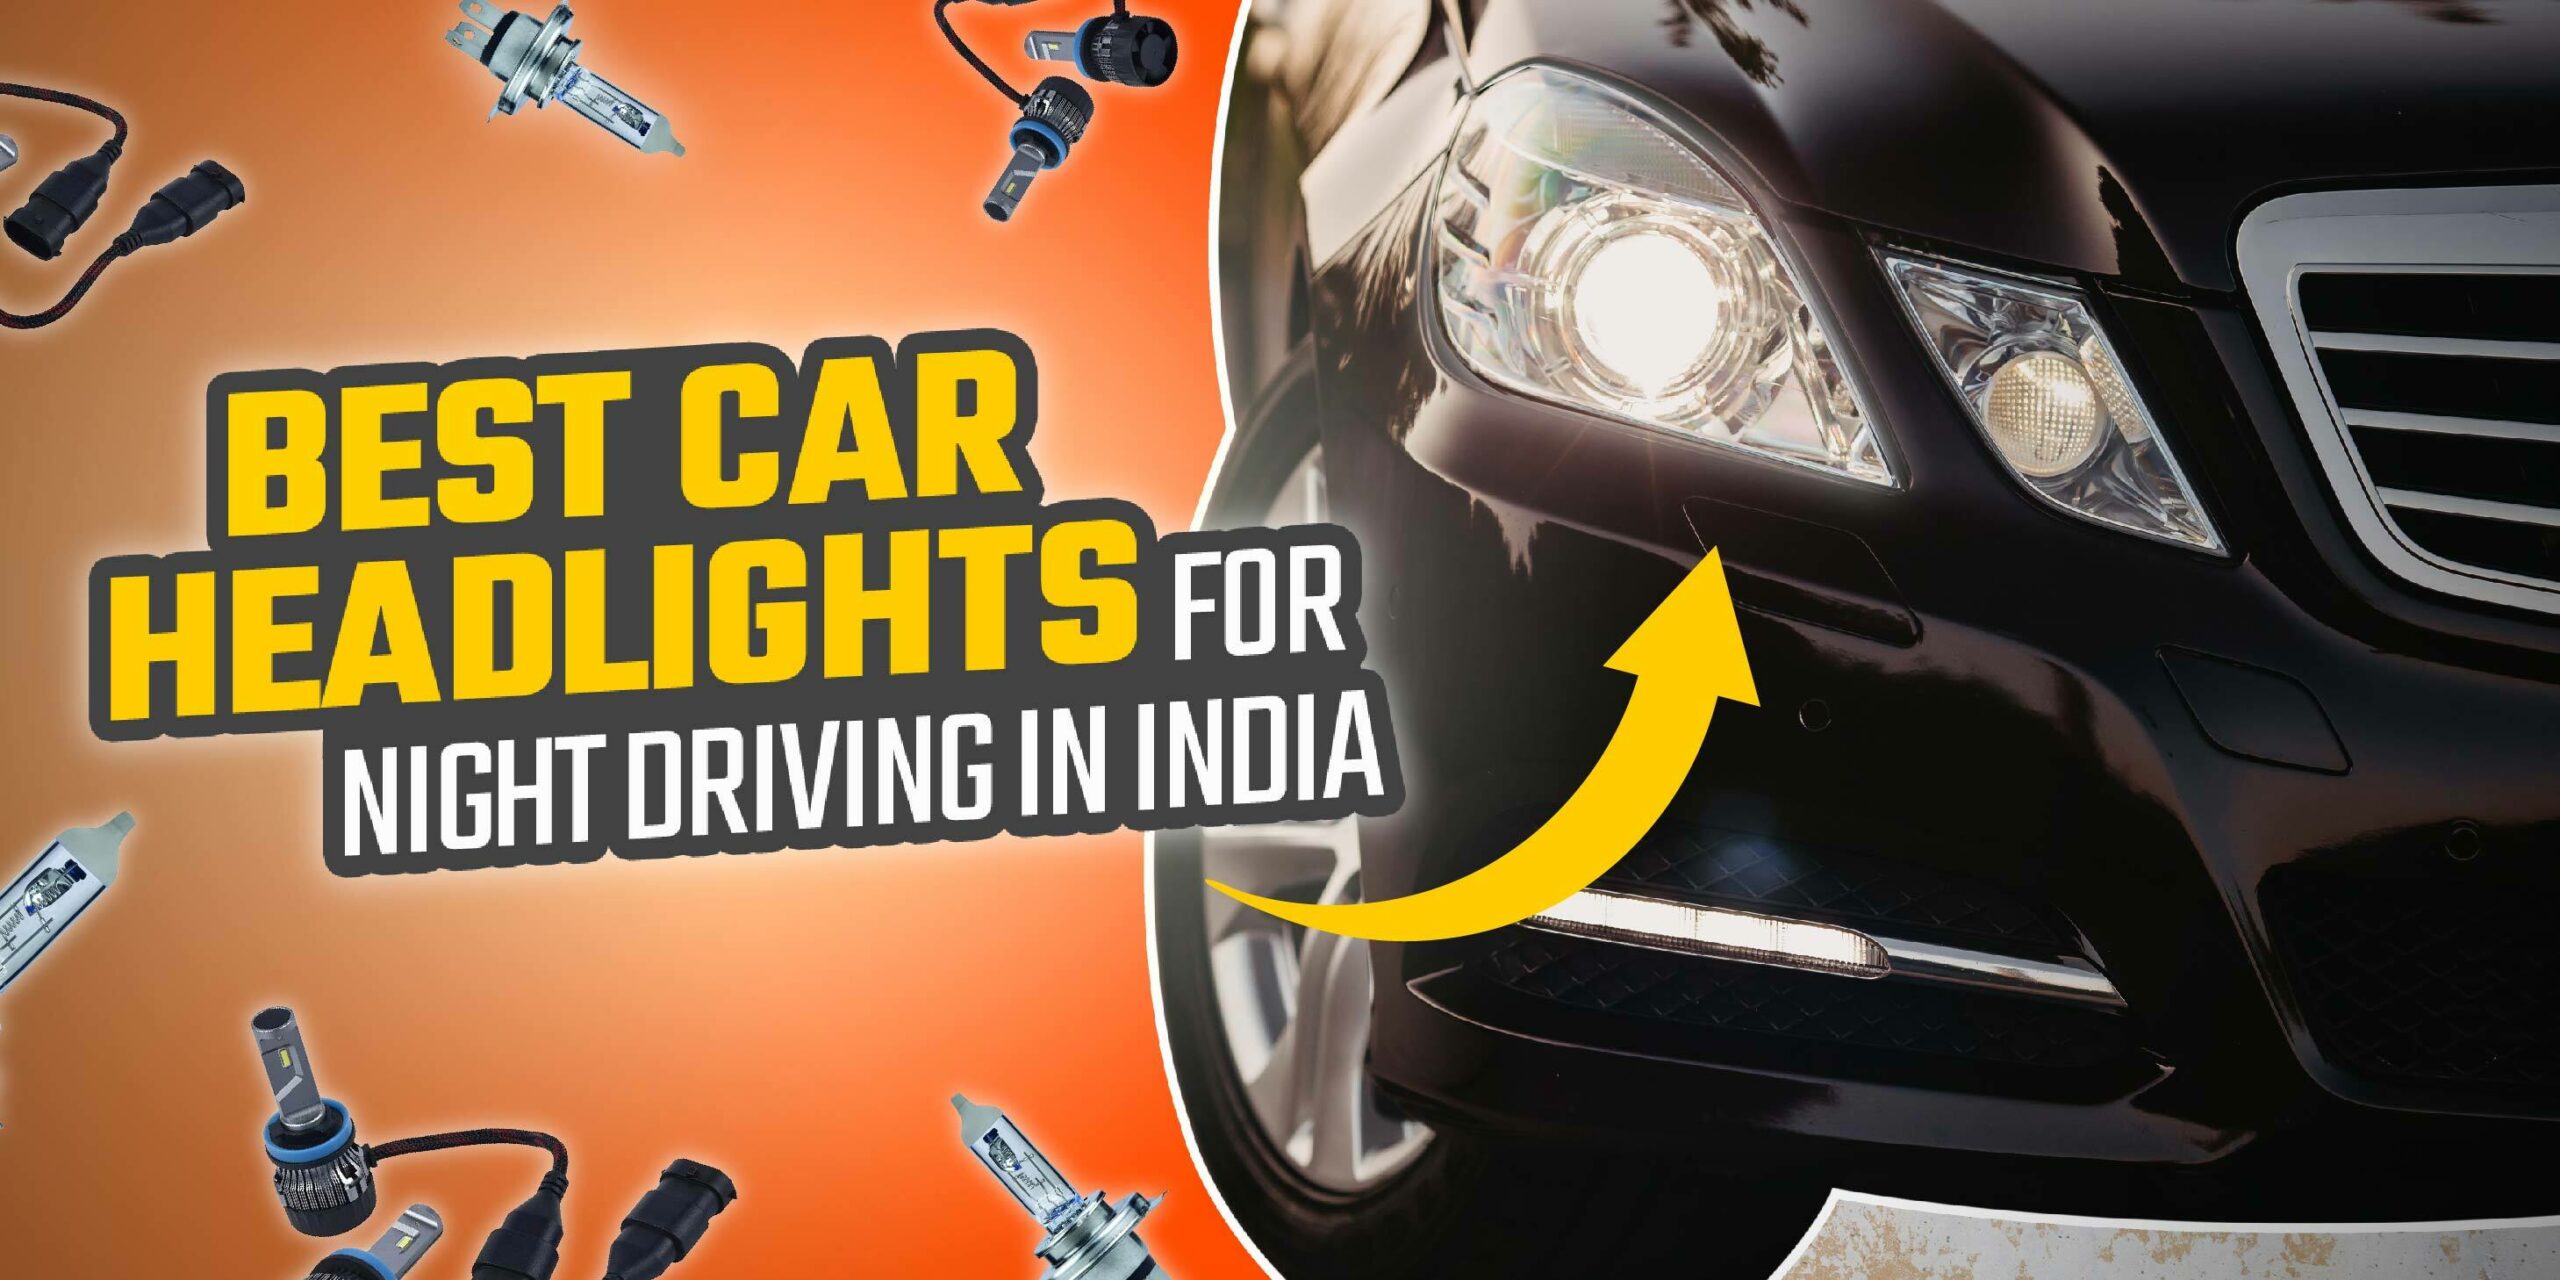 high-risk-psp-for-headlights-in-india